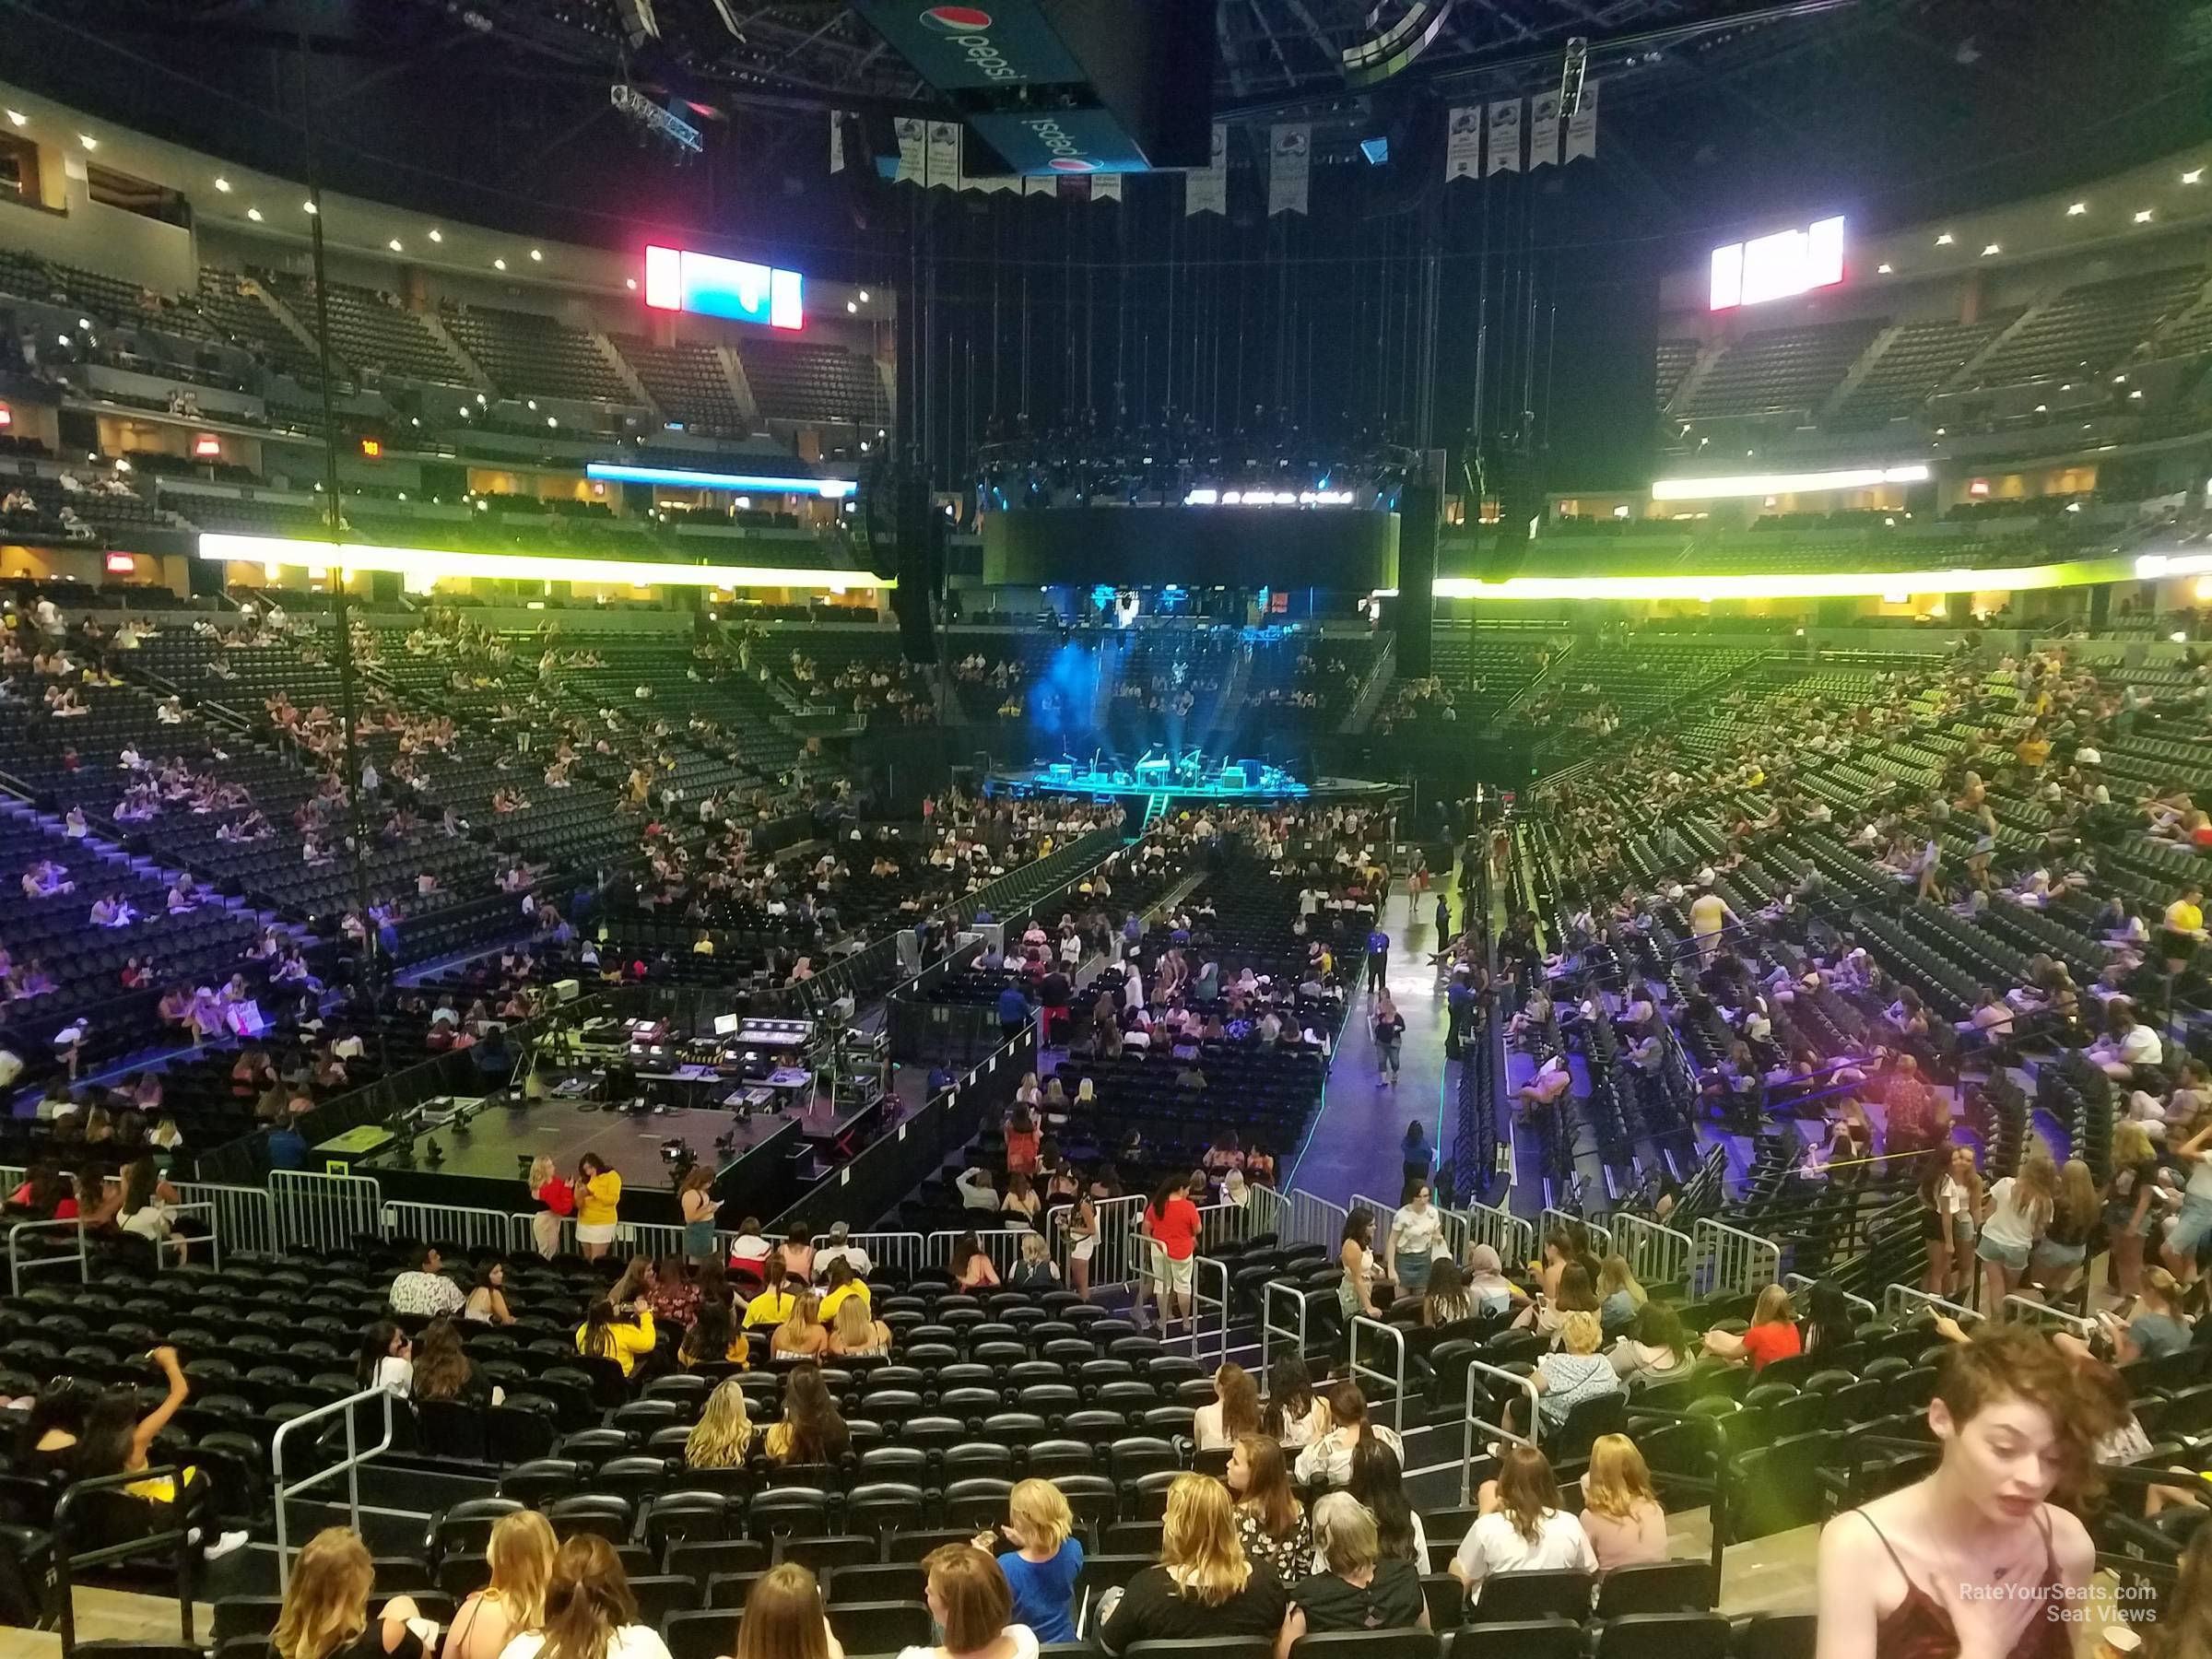 section 110, row 19 seat view  for concert - ball arena